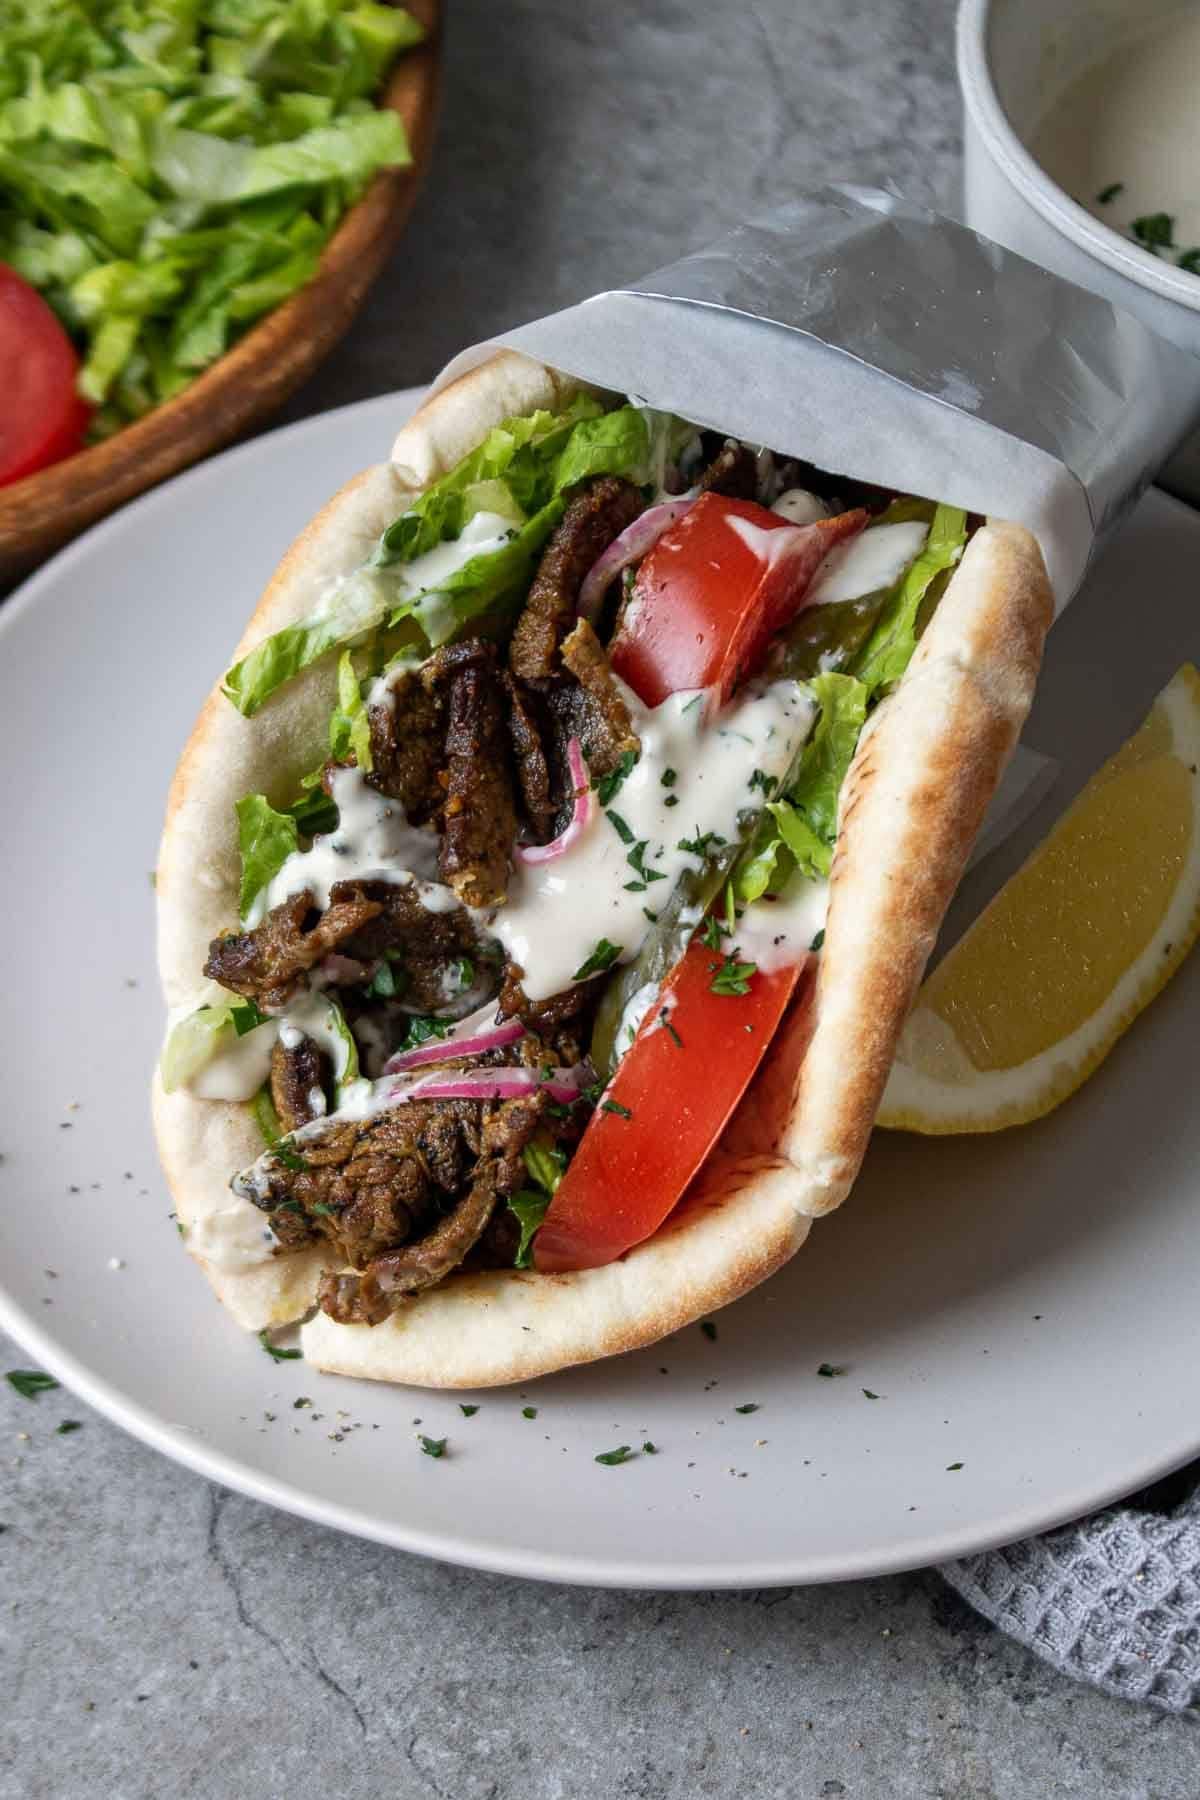 Delicious beef shawarma wrap wit tomatoes, herbs and creamy sauce